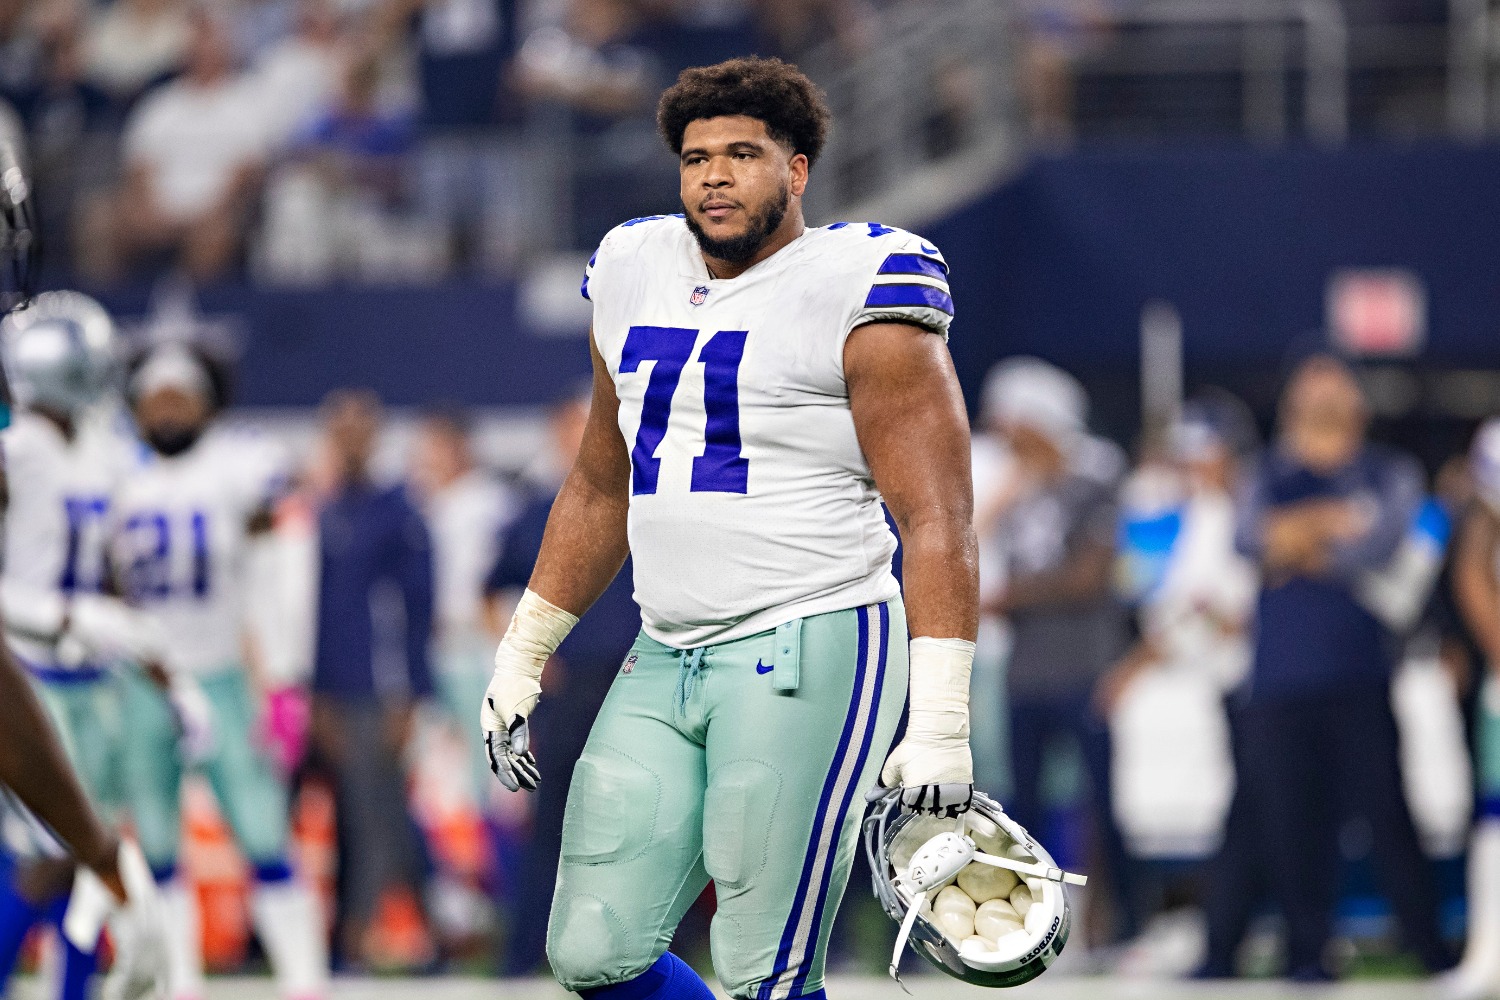 The Cowboys will have to play the rest of the season without La'el Collins, who will miss the remainder of the year with a hip injury that requires surgery.